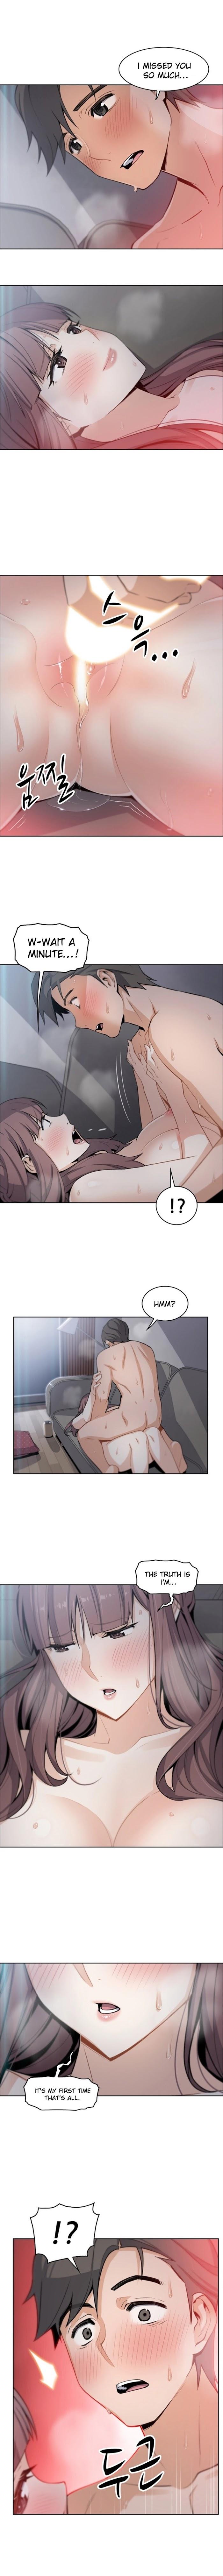 Housekeeper [Neck Pillow, Paper] Ch.49/49 [English] [Manhwa PDF] Completed 123